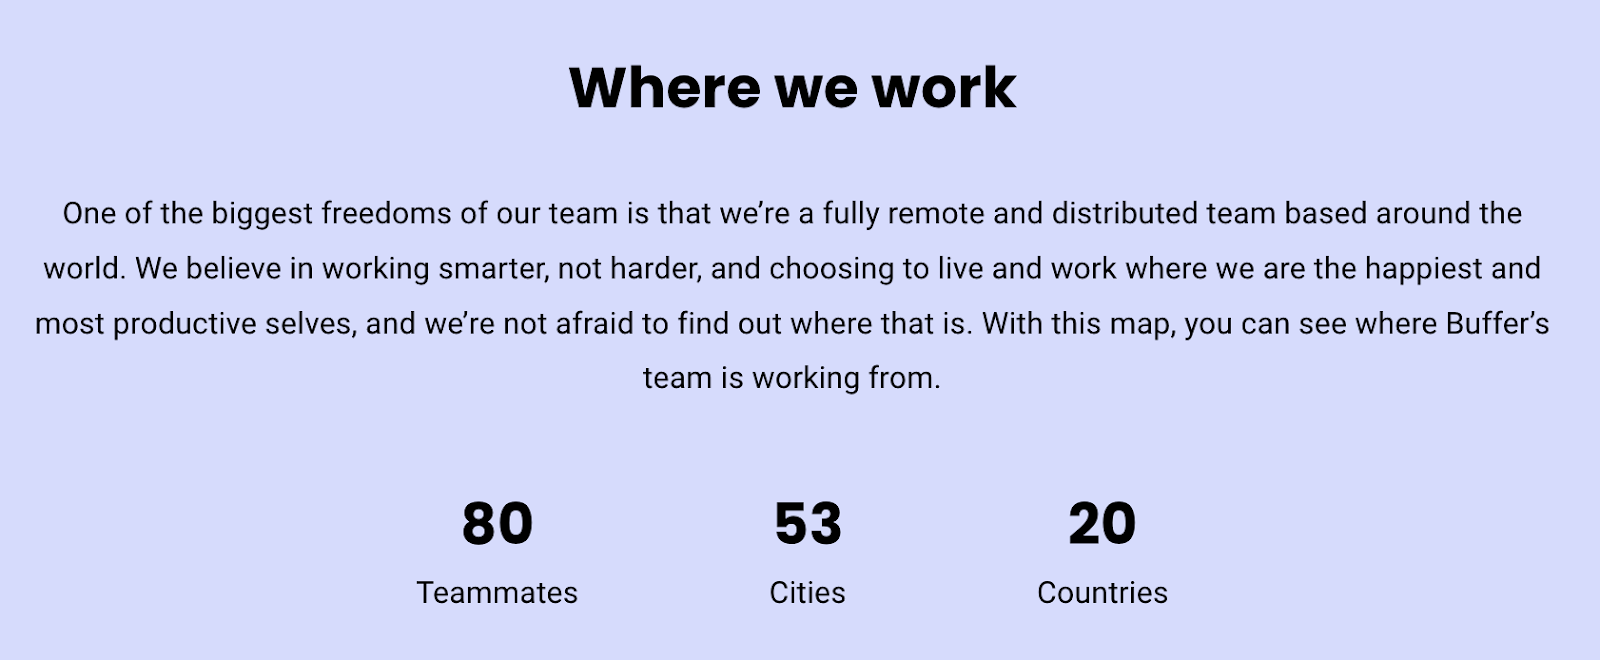 Interests on resume: A paragraph from Buffer’s website that describes their remote work company. 